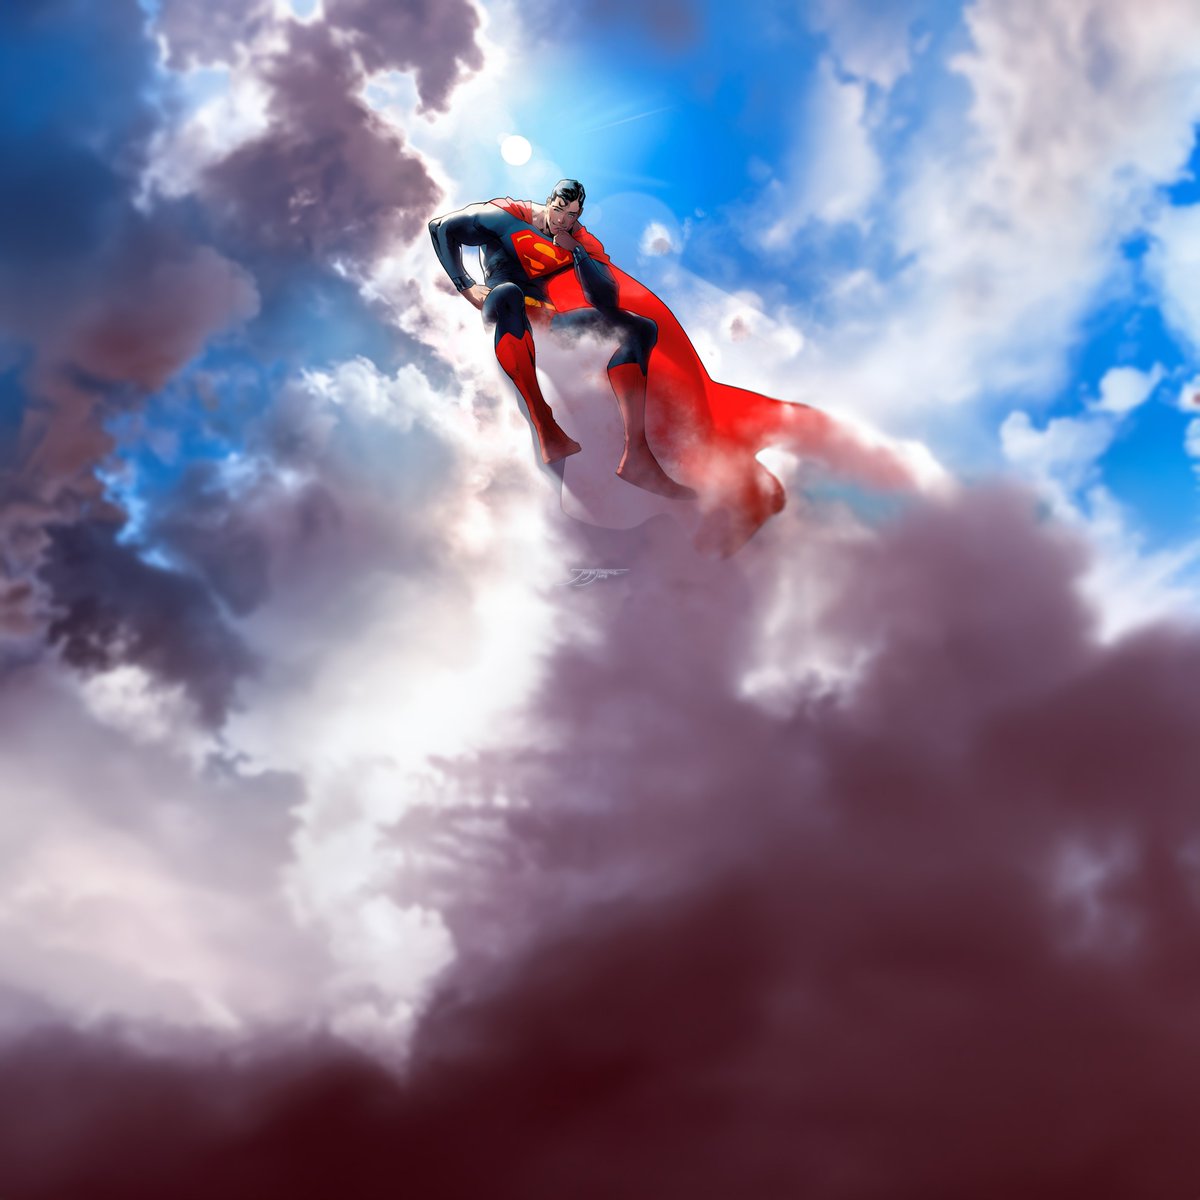 Artist Jorge Jimenez made his debut in comics in 2010 with All Summer In A Day an adaptation of the novel by the legendary Ray Bradbury, but this rendition of  #Superman is one of my favorites. 

I may have added more border clouds to it with @Photoshop